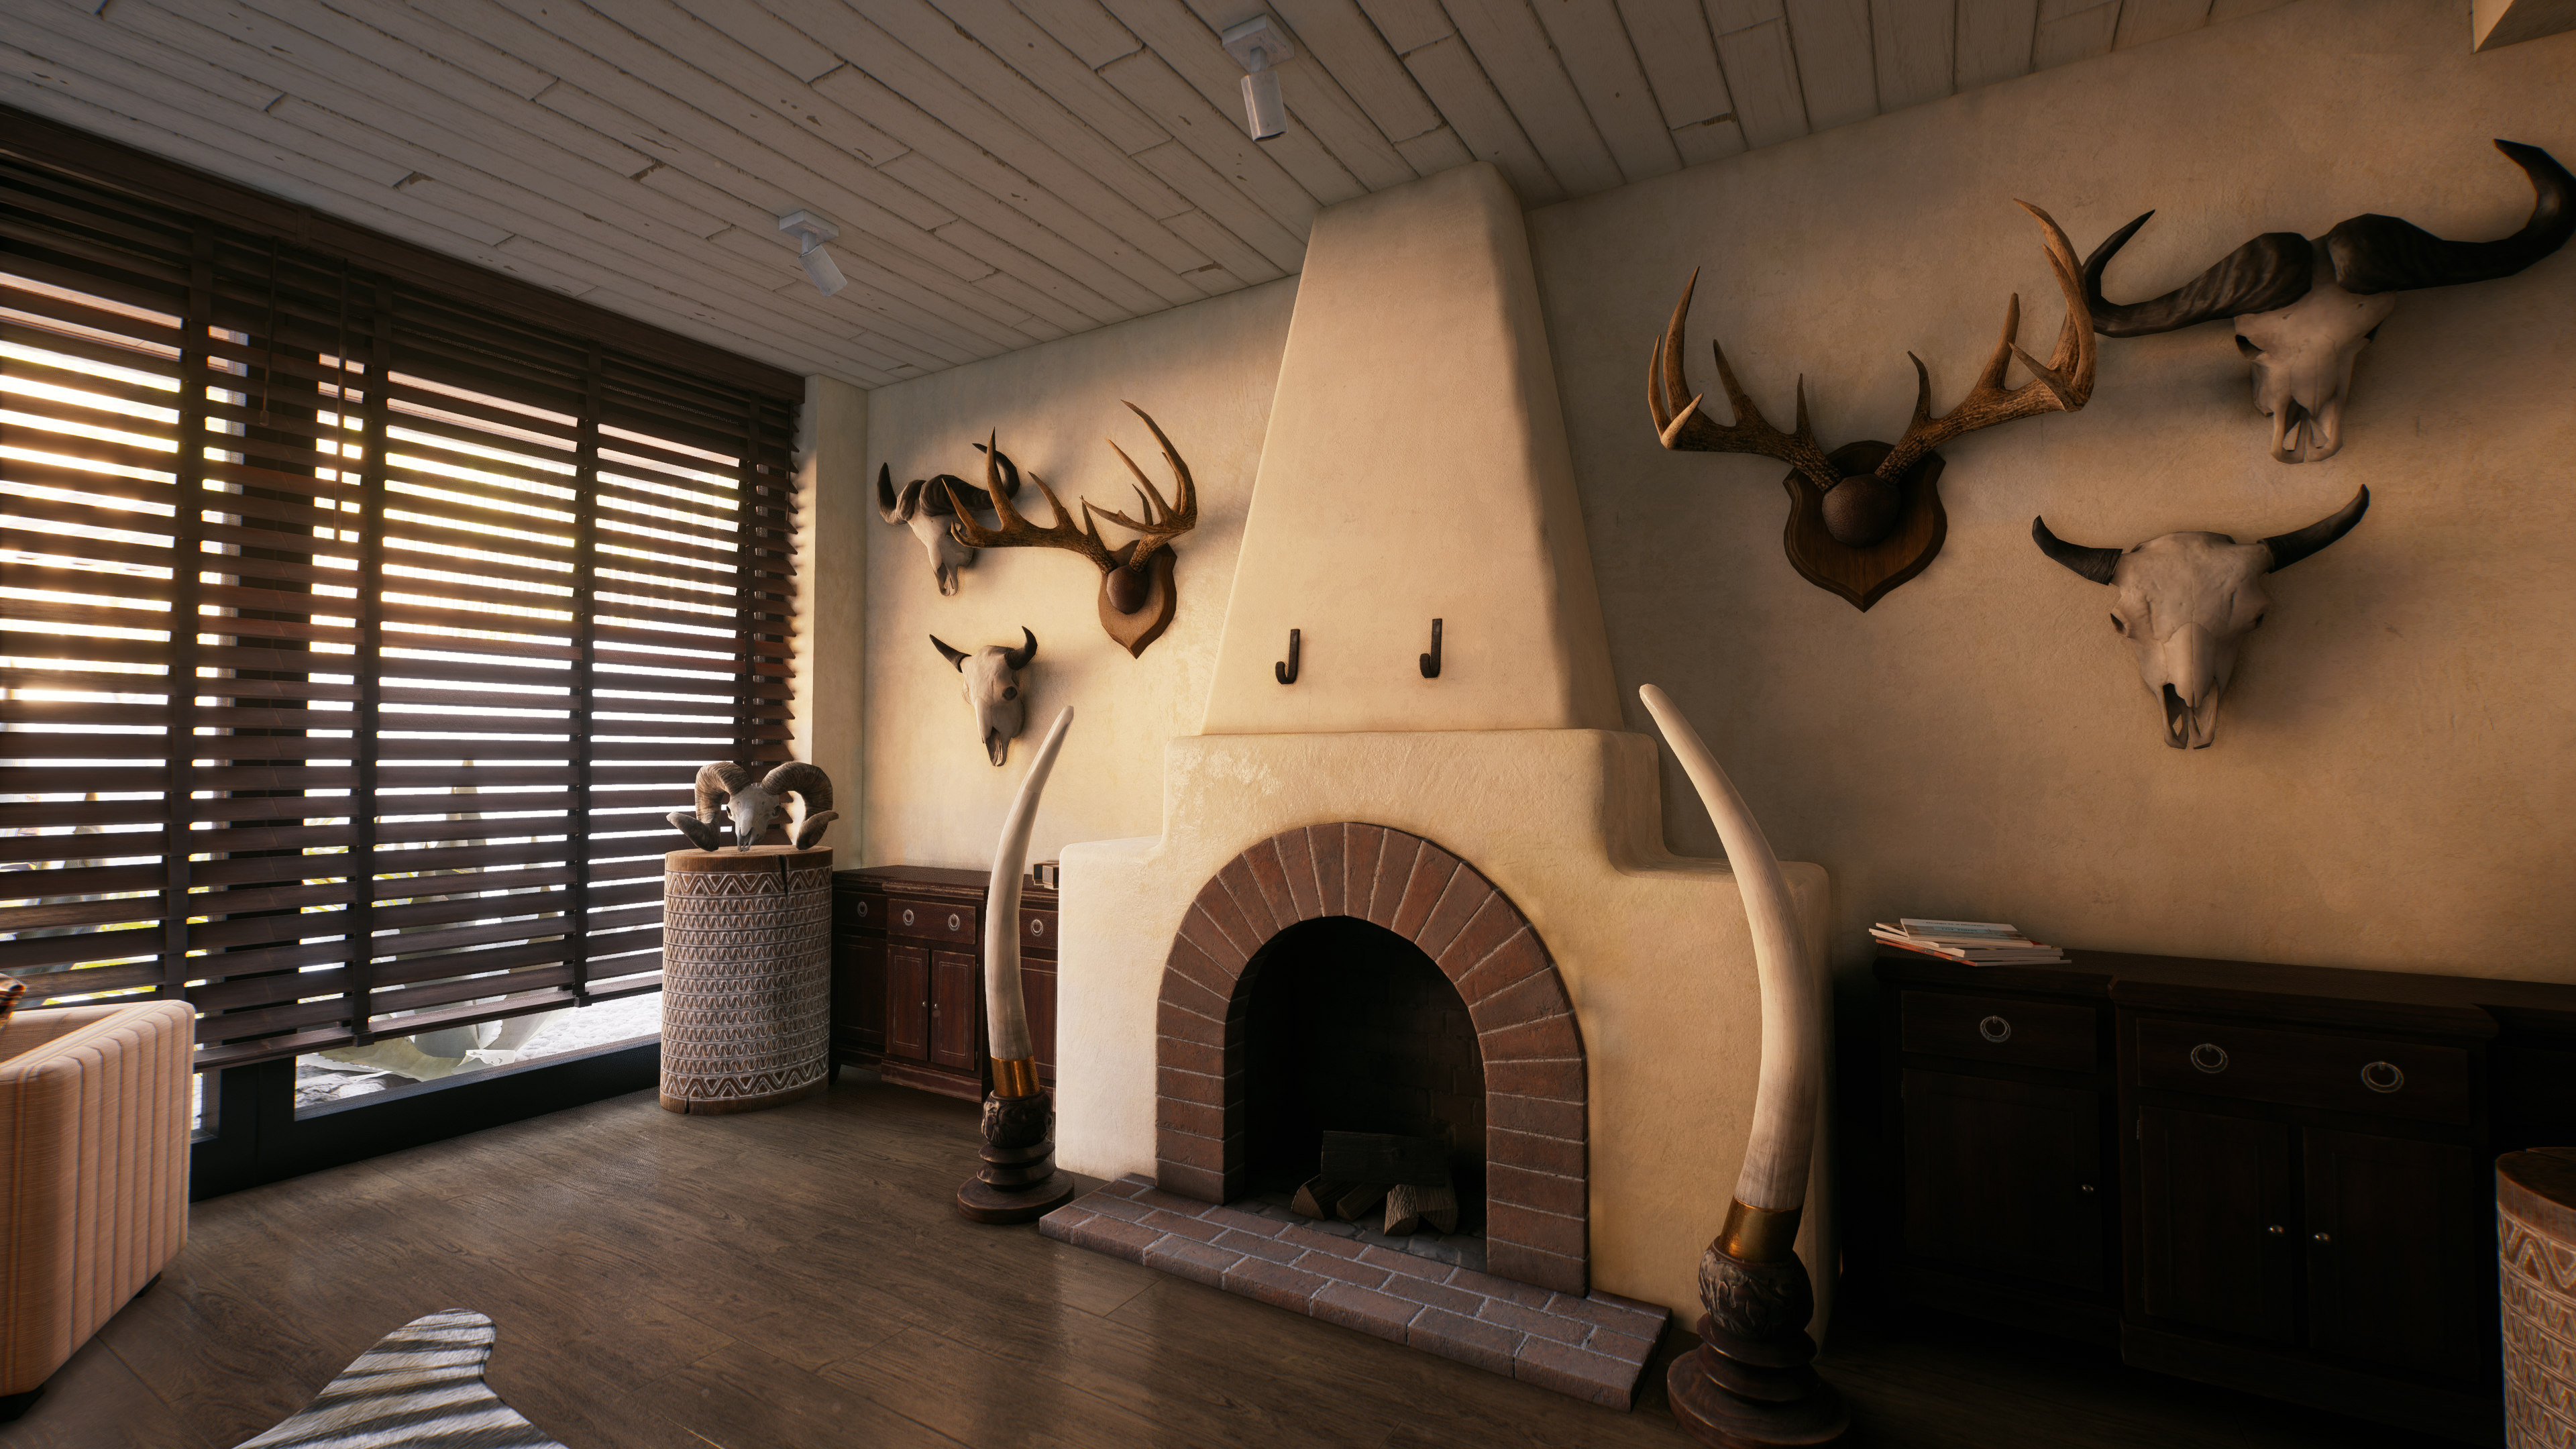 General 3840x2160 Dead Island 2 Nvidia RTX video games CGI interior antlers animals skull blinds window fireplace